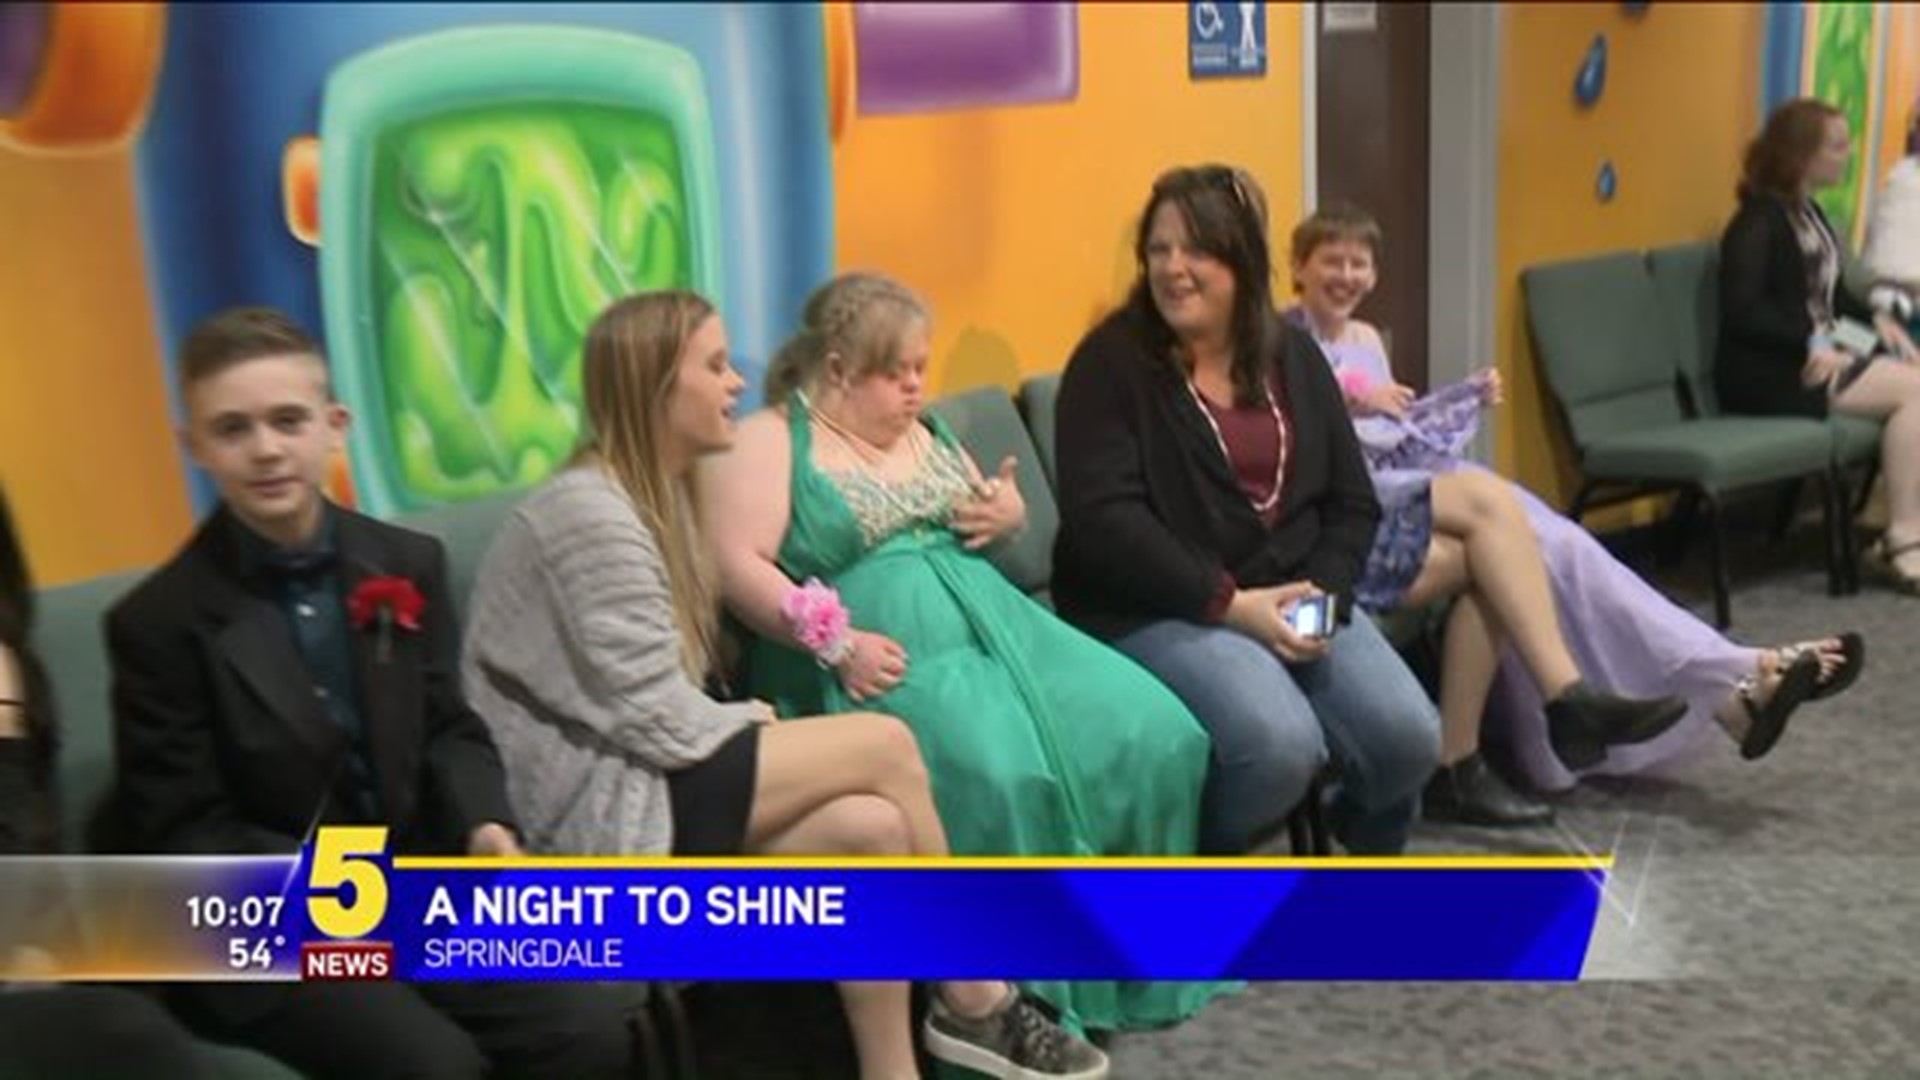 Cross Church Holds A Night To Shine Prom